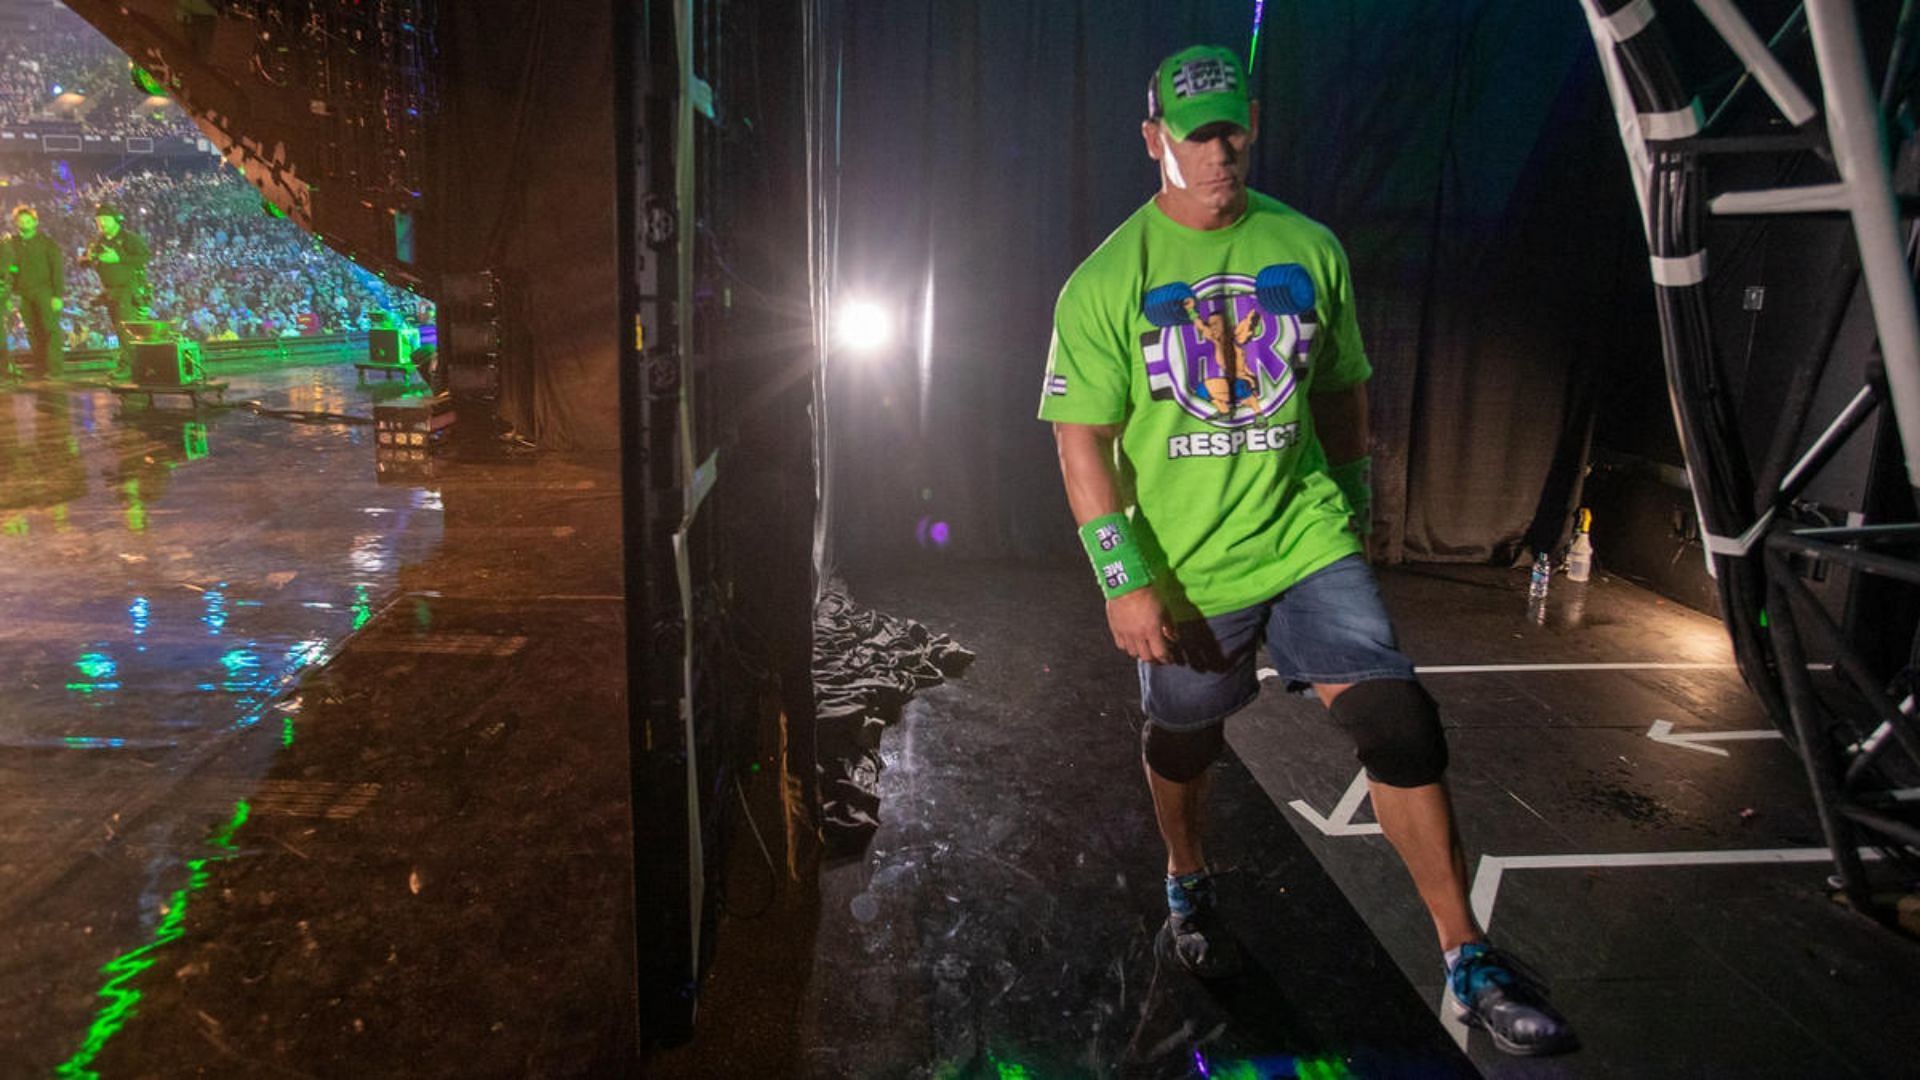 John Cena may not have wrestled his last match.